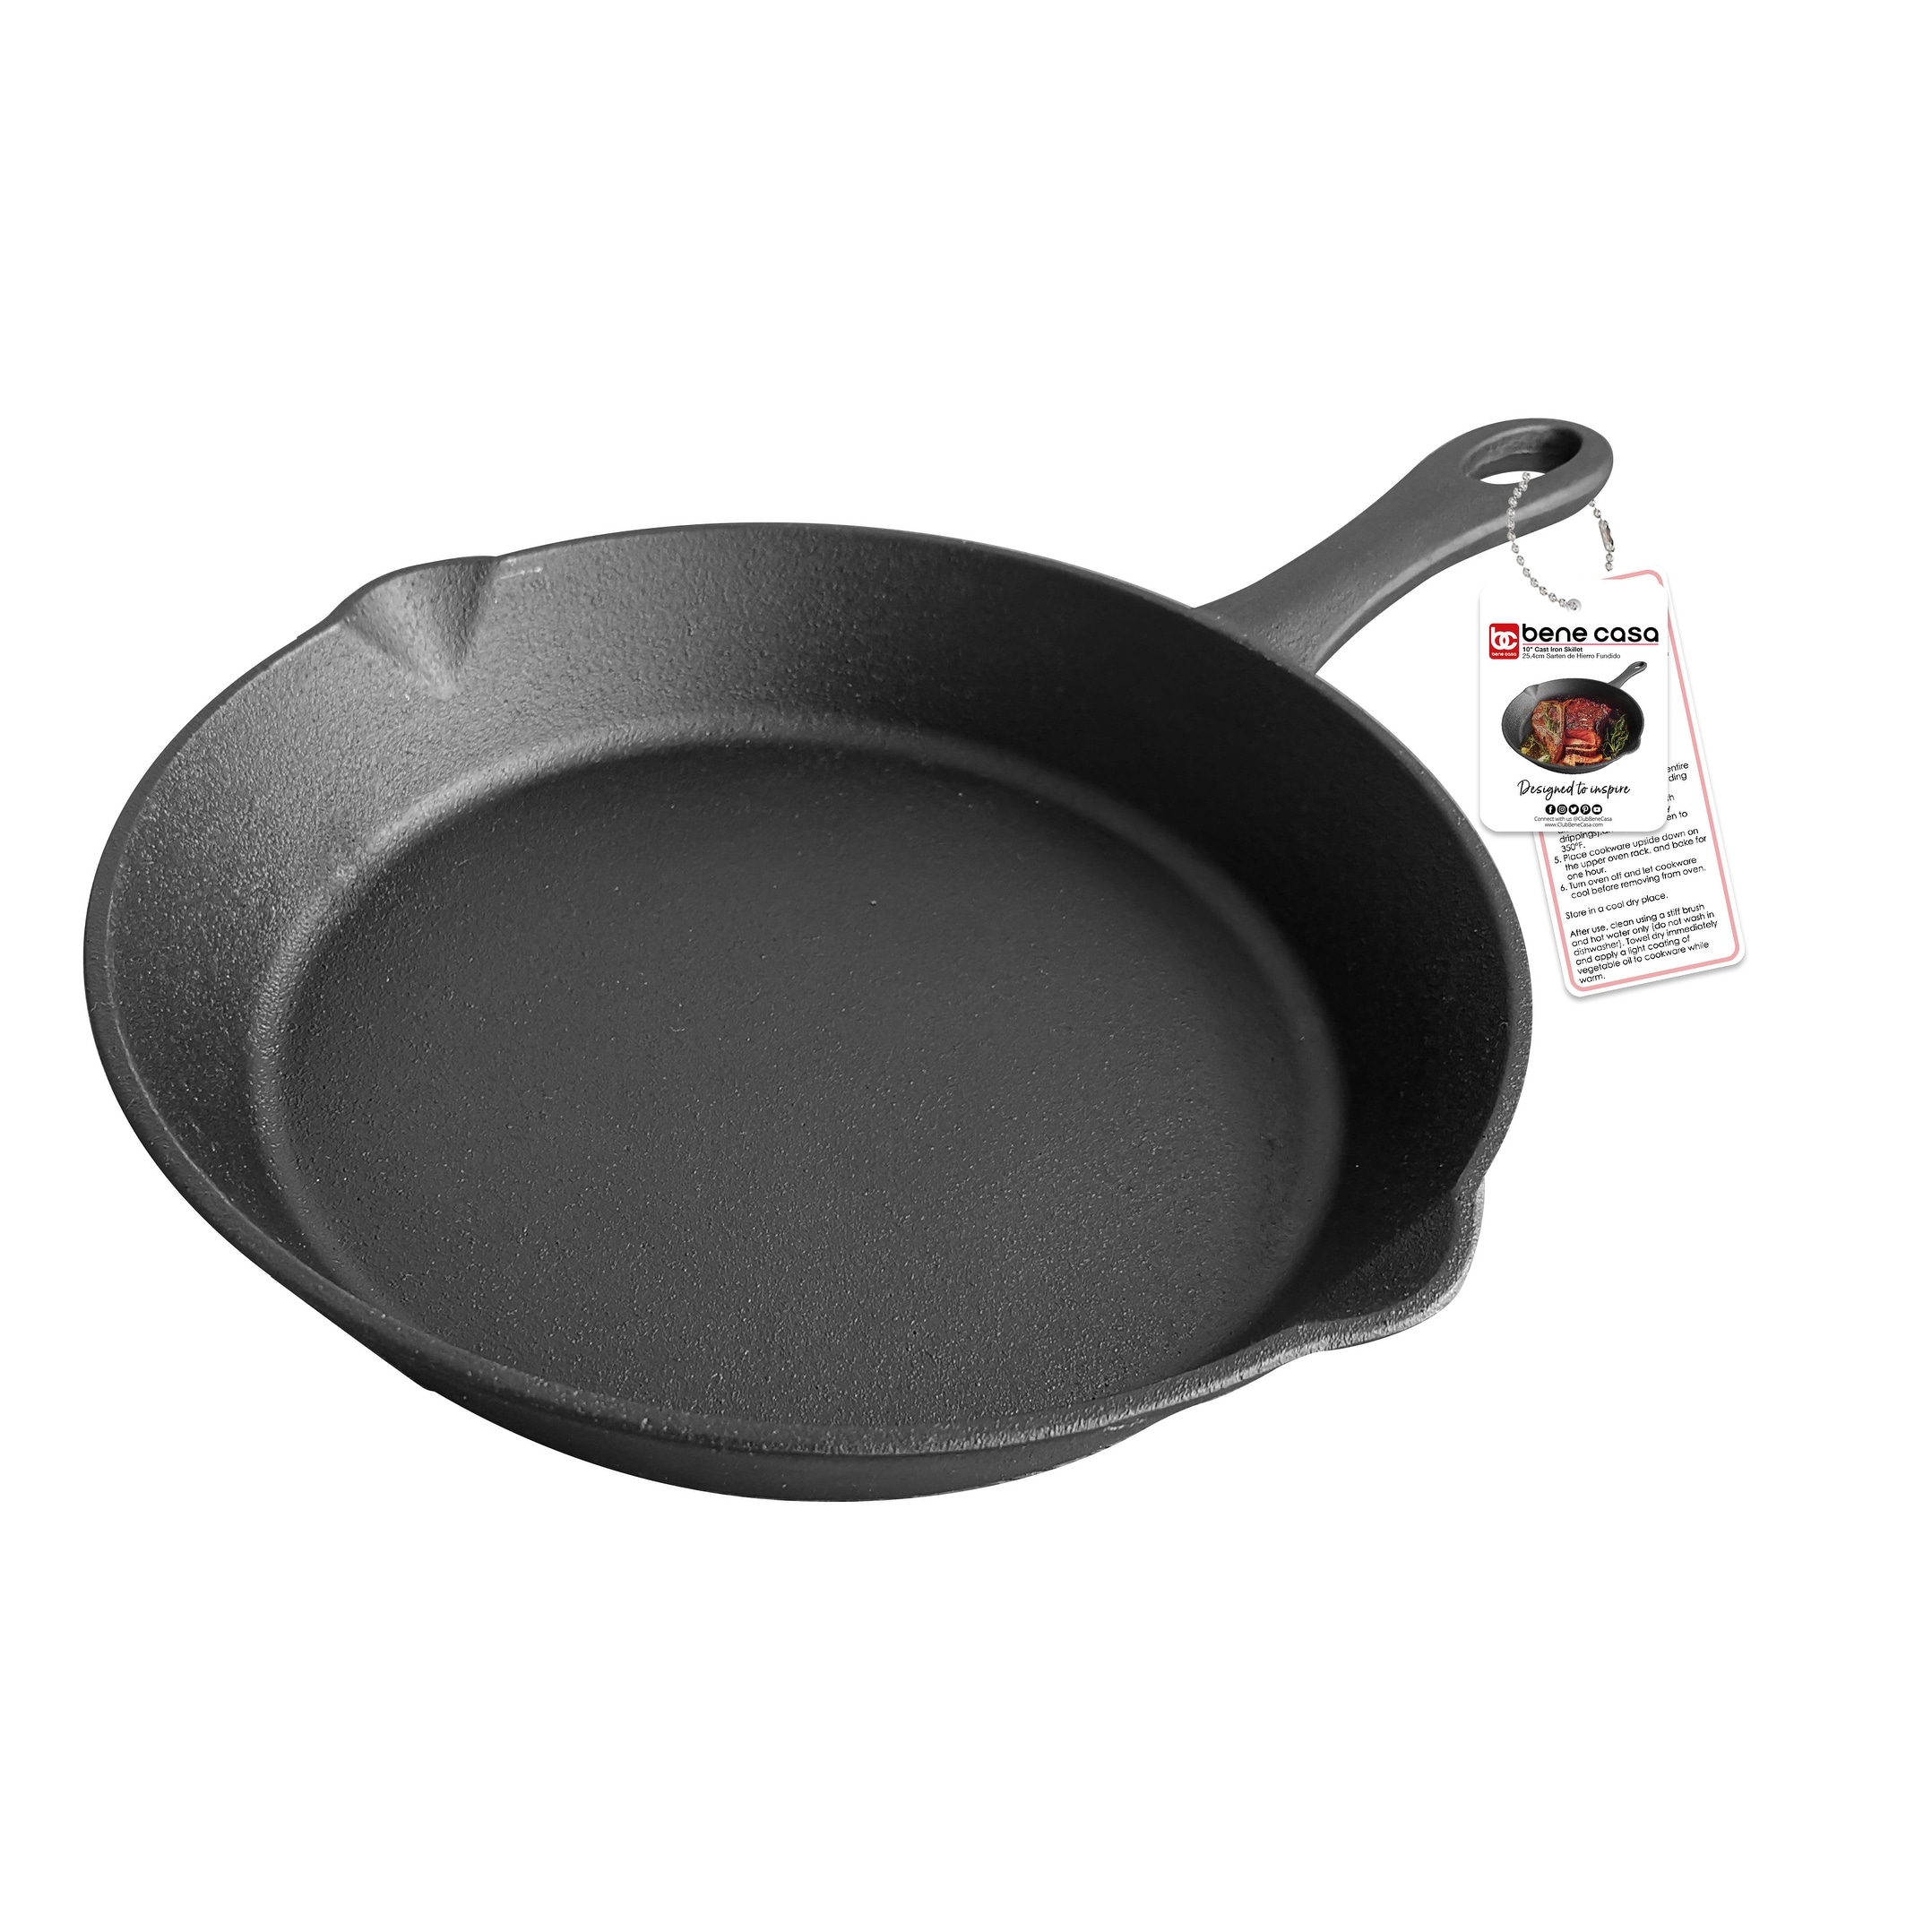 https://ak1.ostkcdn.com/images/products/is/images/direct/4b65873742d8571a317b96366878911f4584a8f0/Bene-Casa-10-inch-cast-iron-skillet-with-long-handle%2C-pre-seasoned-skillet%2C-suitable-for-all-cooking-surfaces.jpg